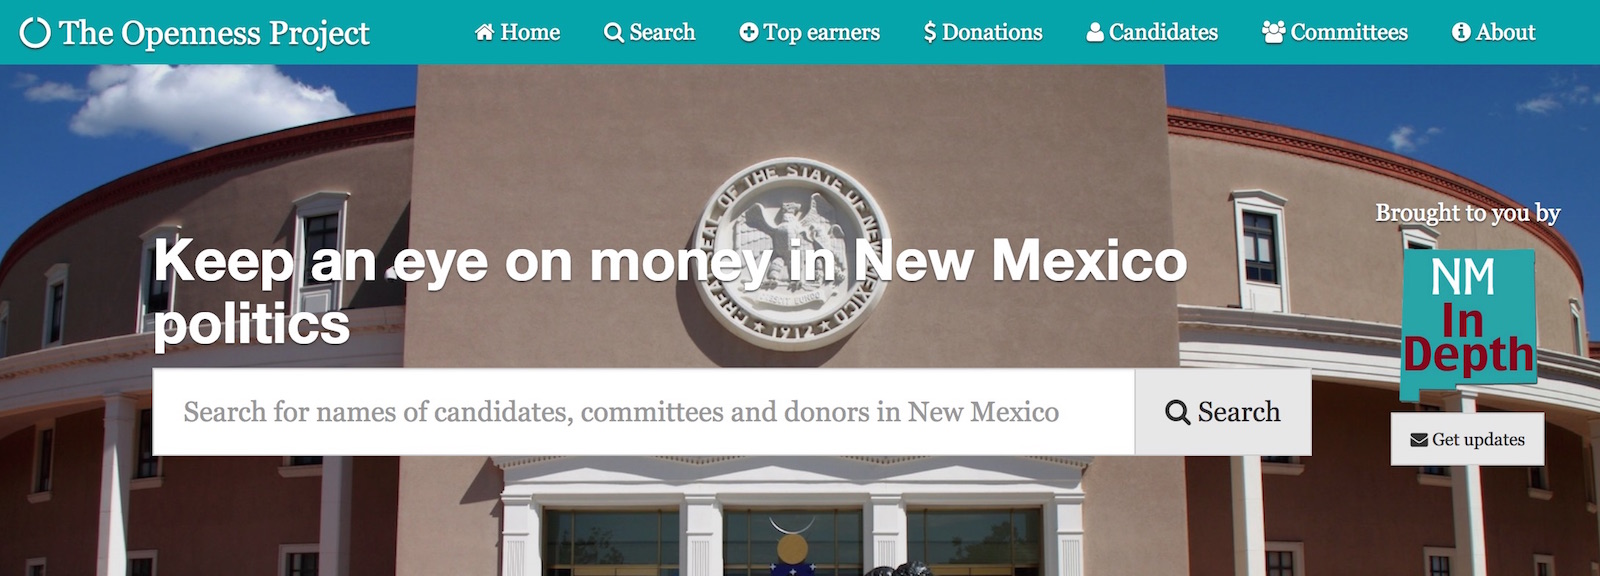 Following the money in New Mexico politics just got a whole lot easier